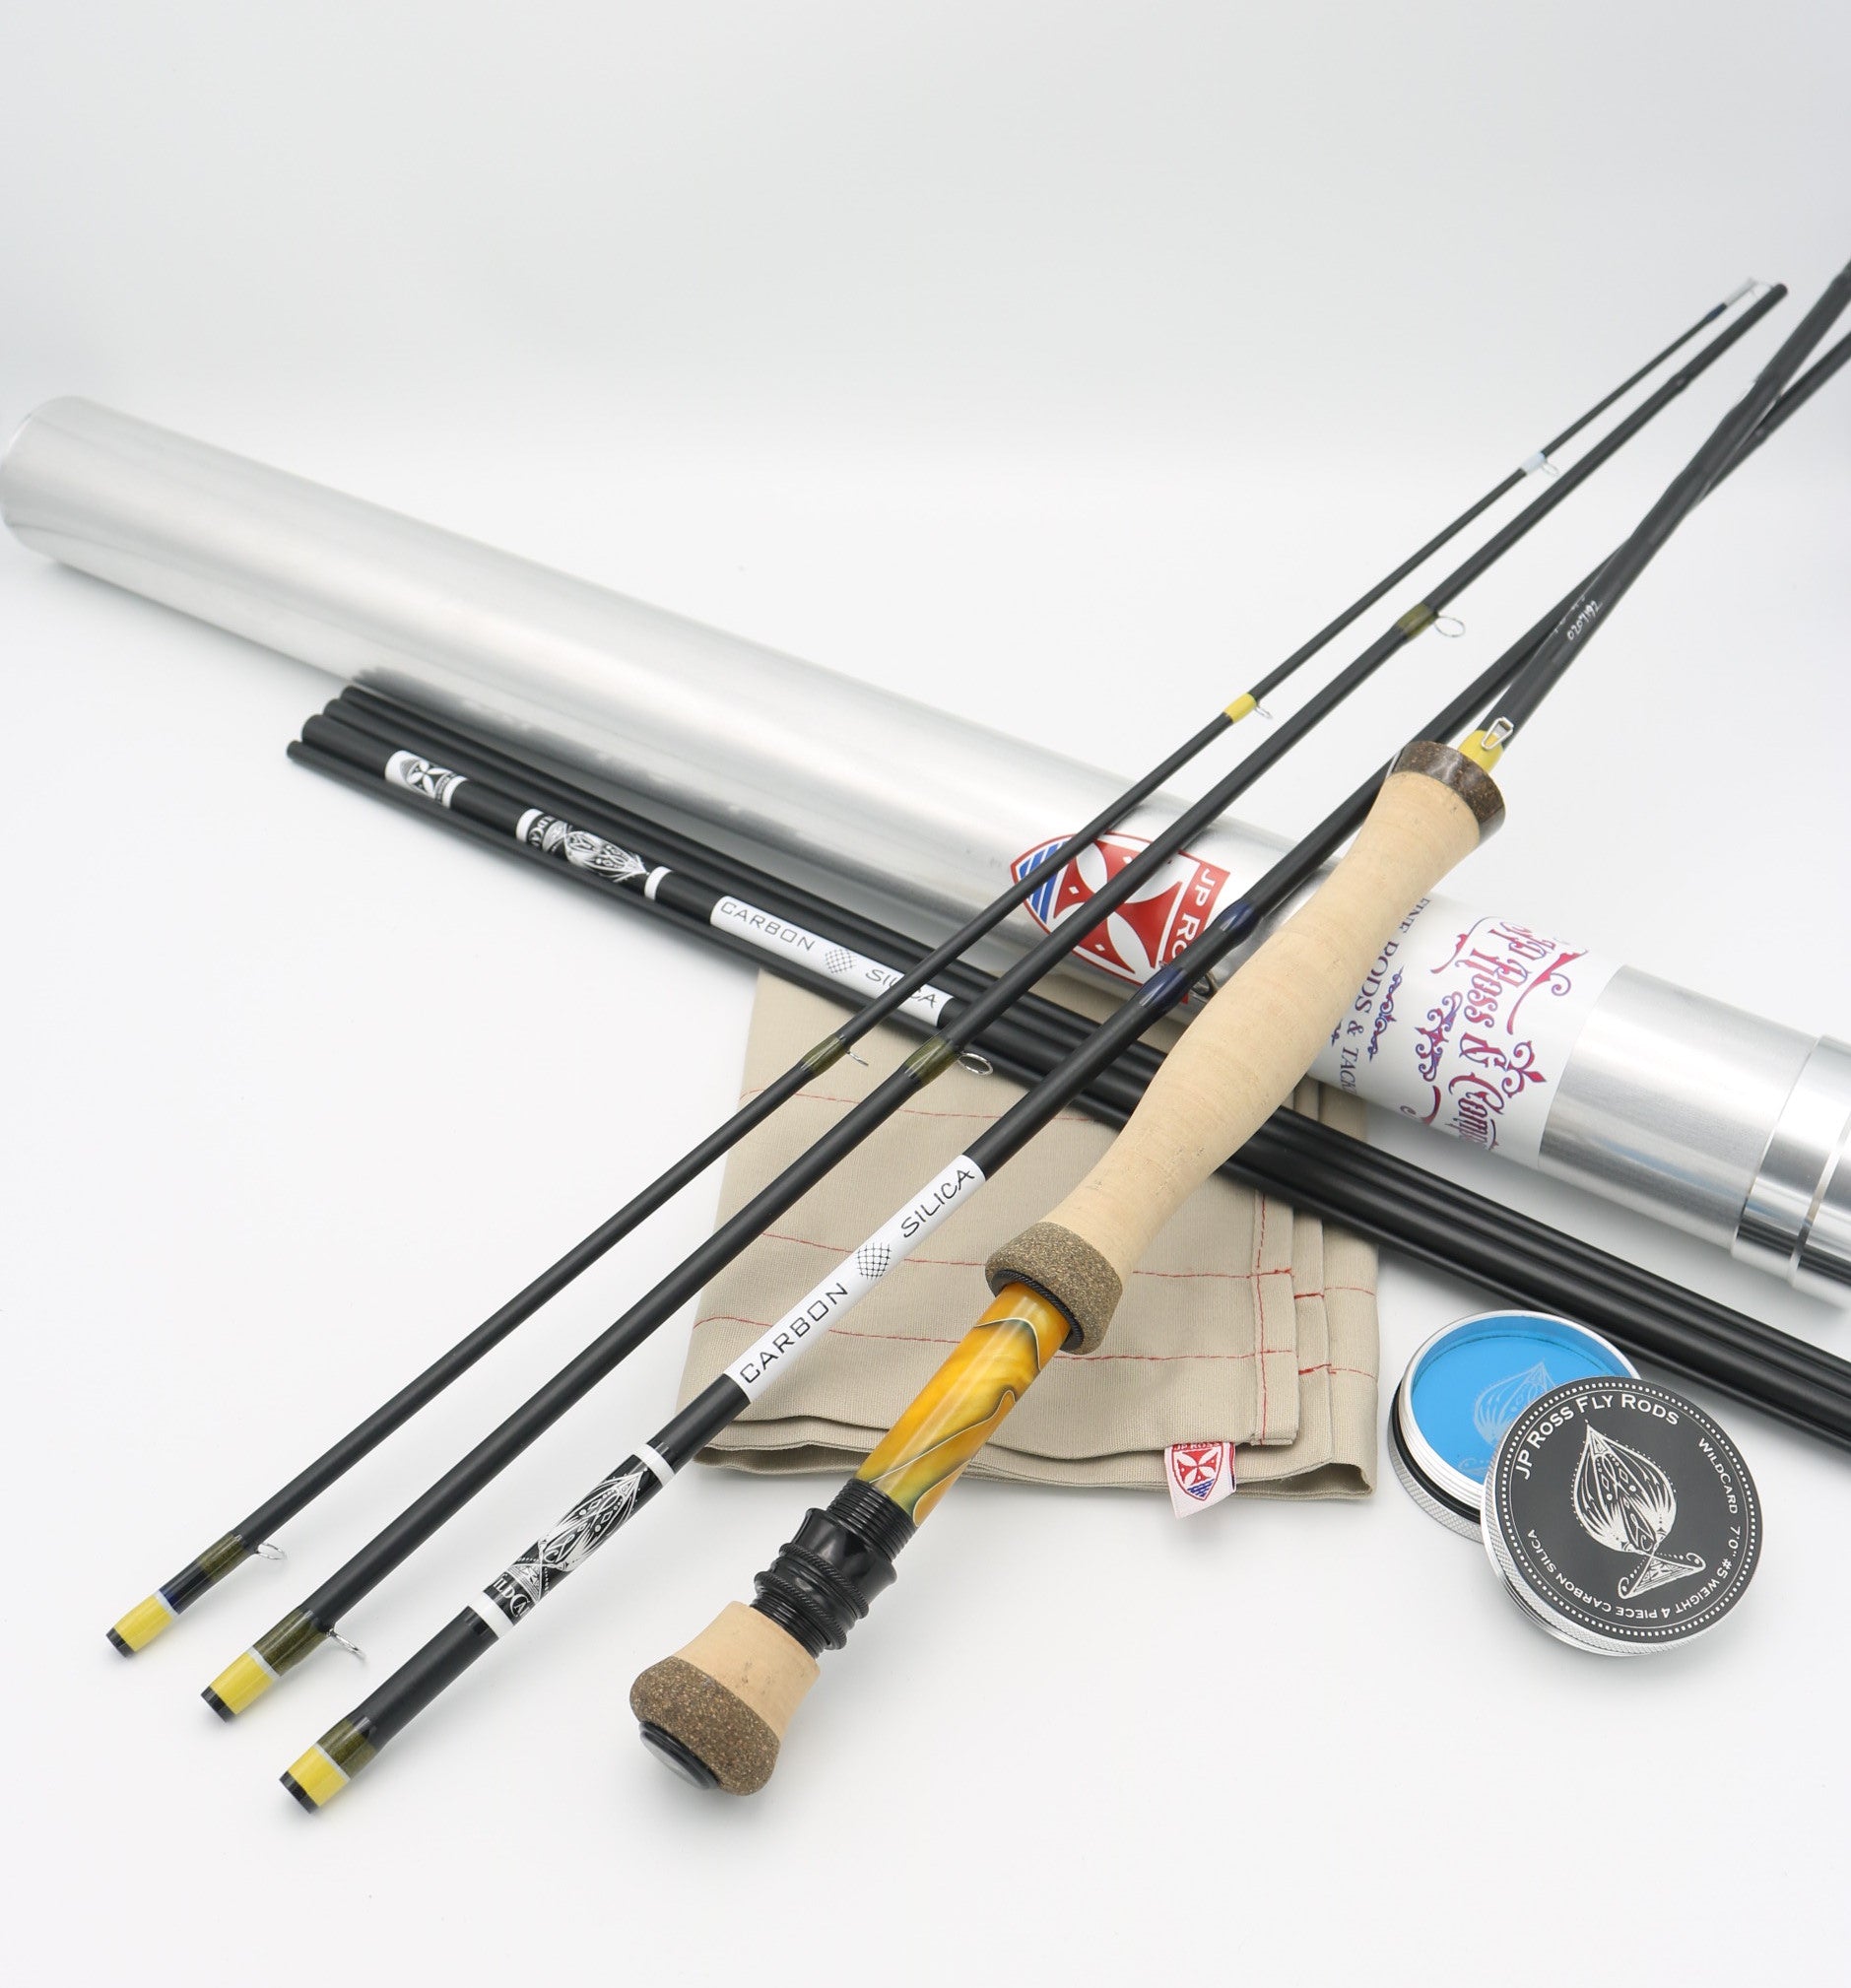 7 foot 5 wt 4 pc WILD CARD Carbon & Glass Hybrid fly rod